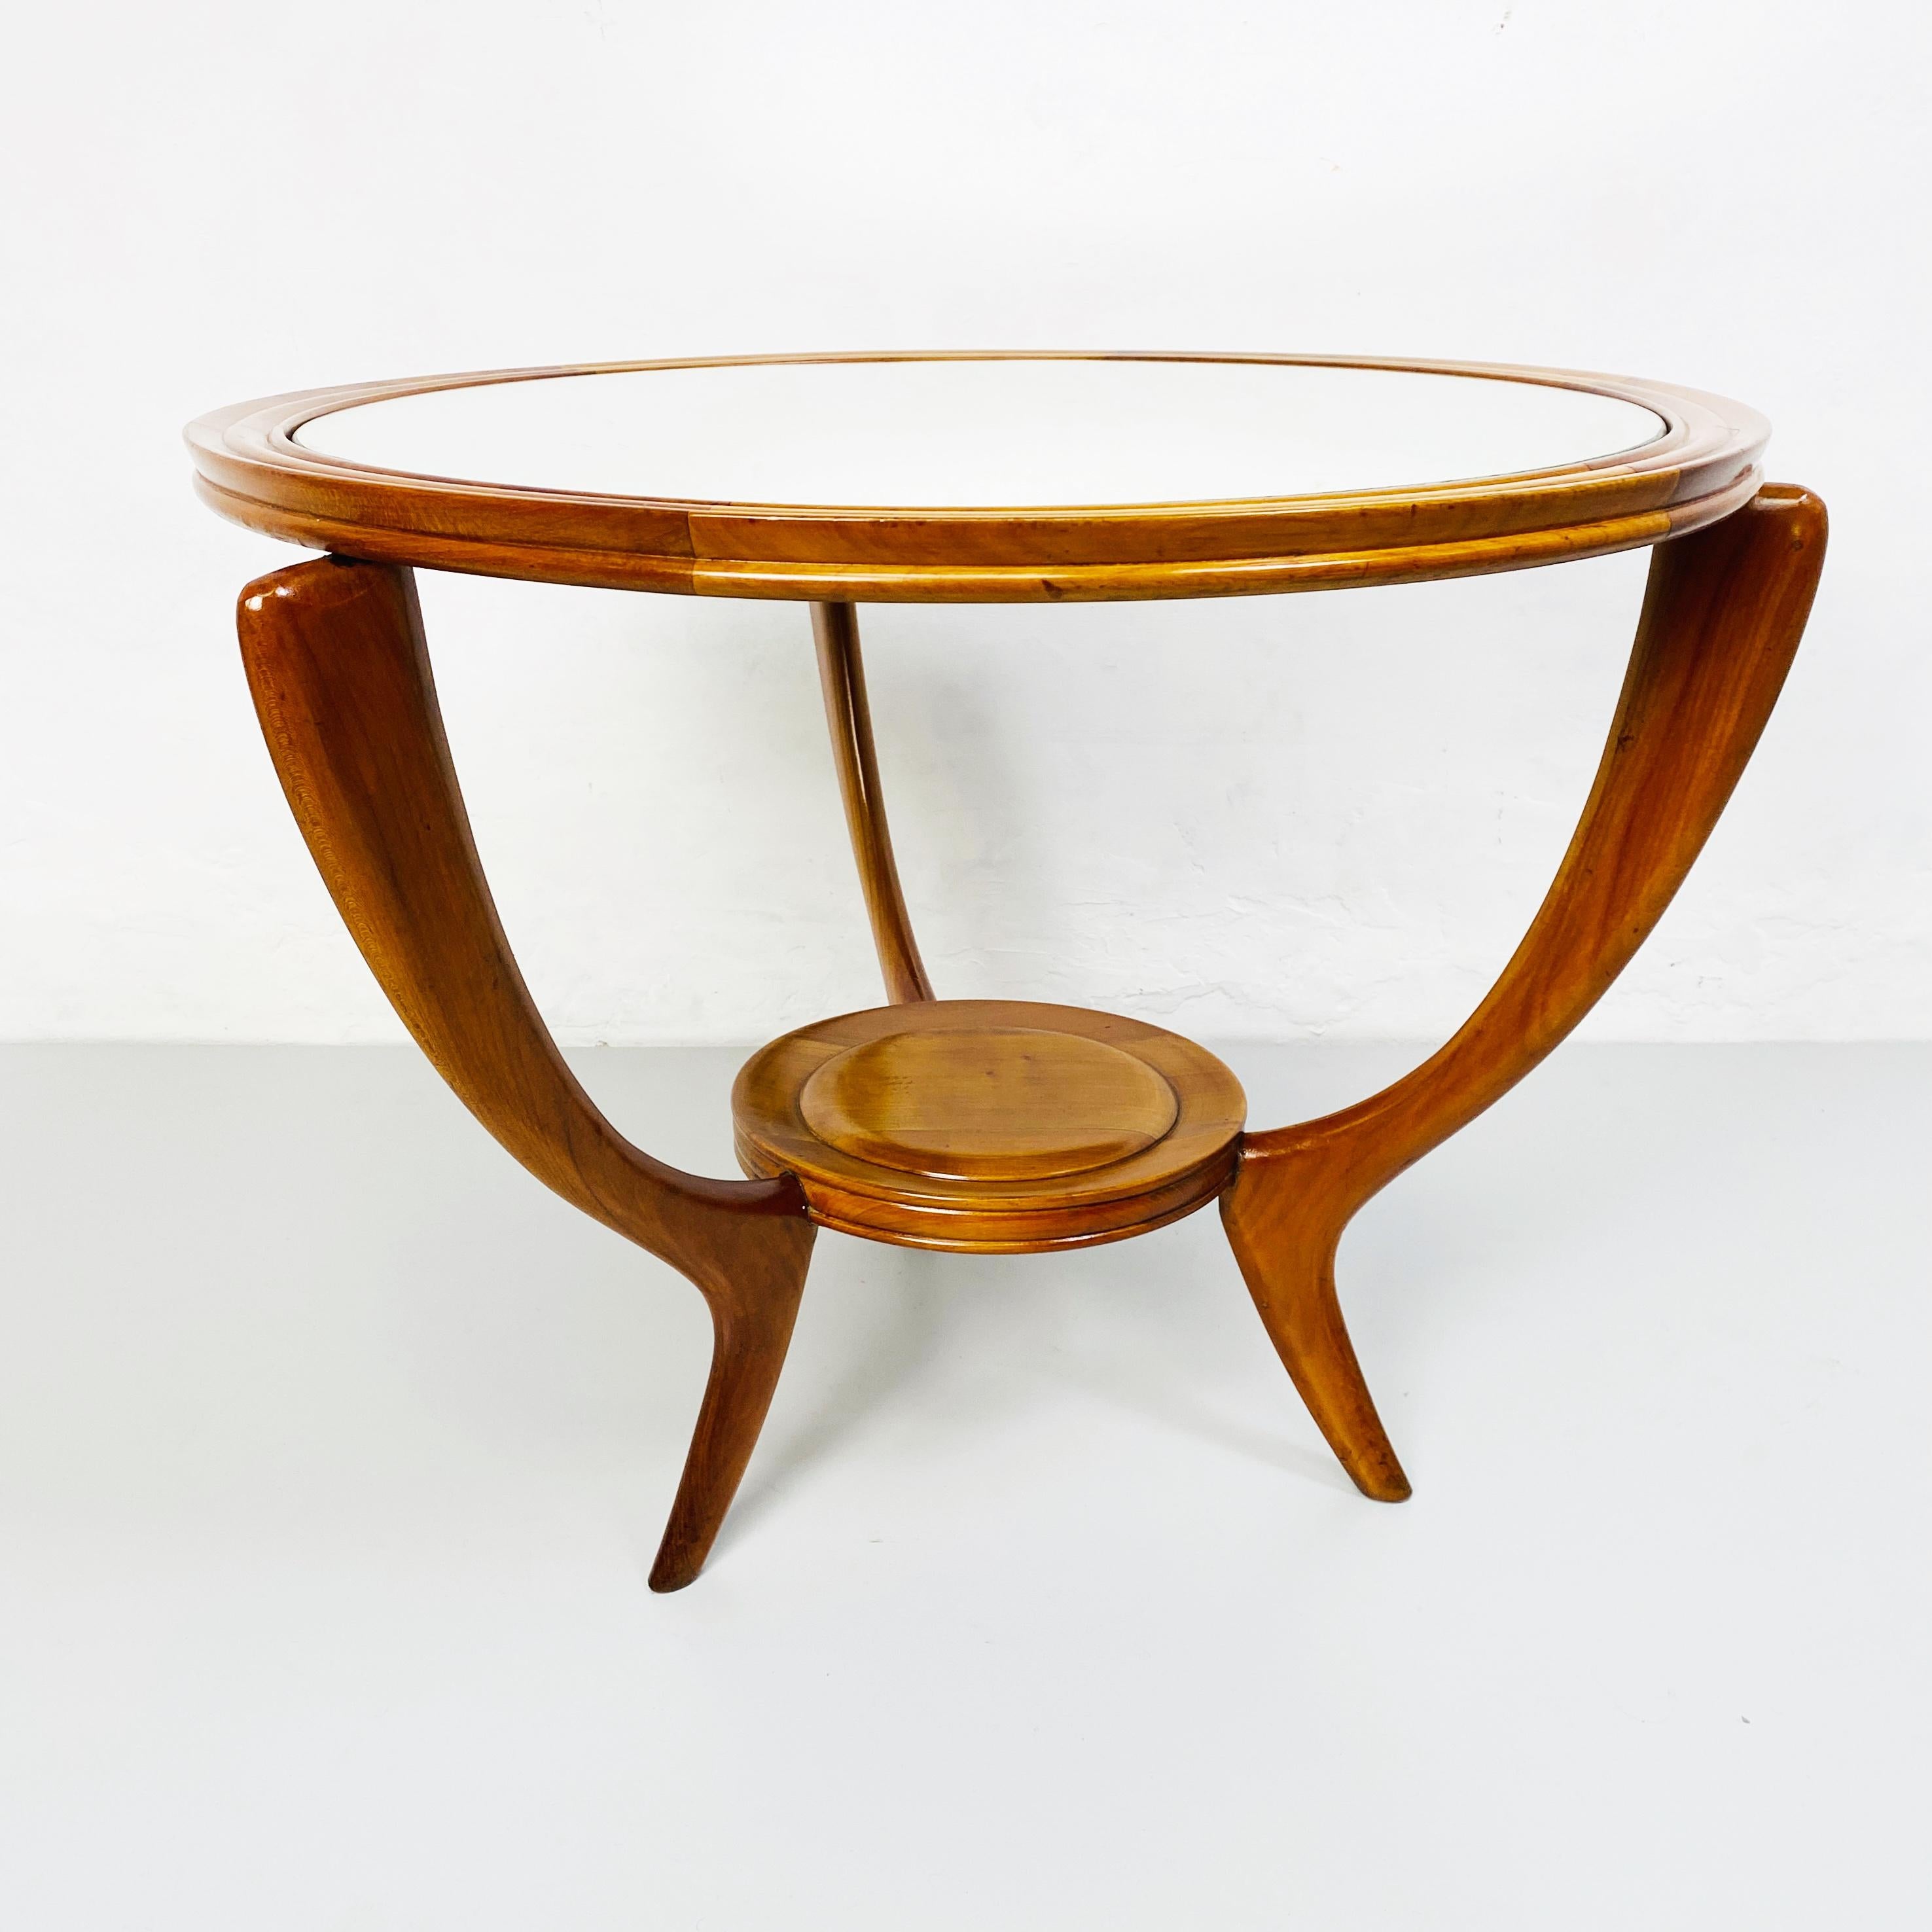 Mid-Century Modern Italian Mid-Century Wood Round Table with Mirror, 1950s For Sale